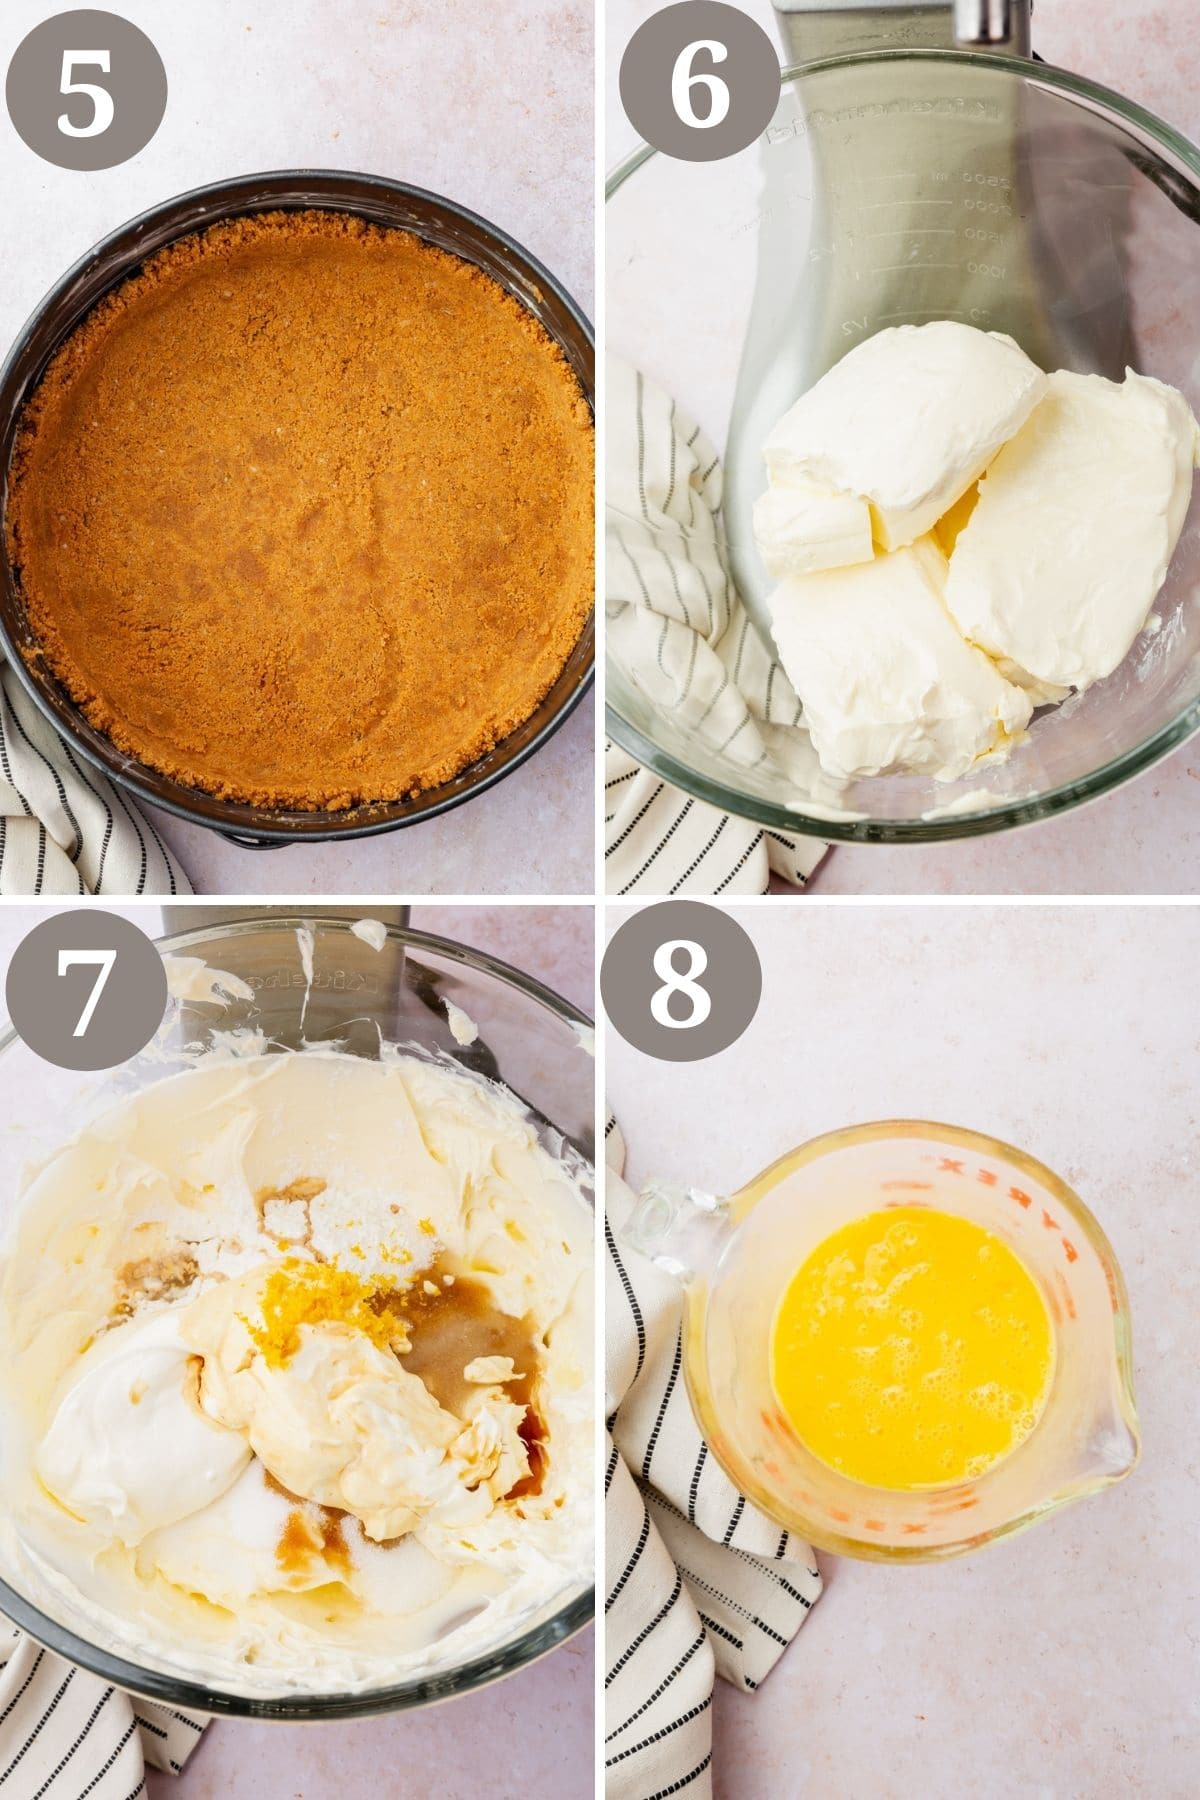 Steps 5-8 for making gluten-free cheesecake.